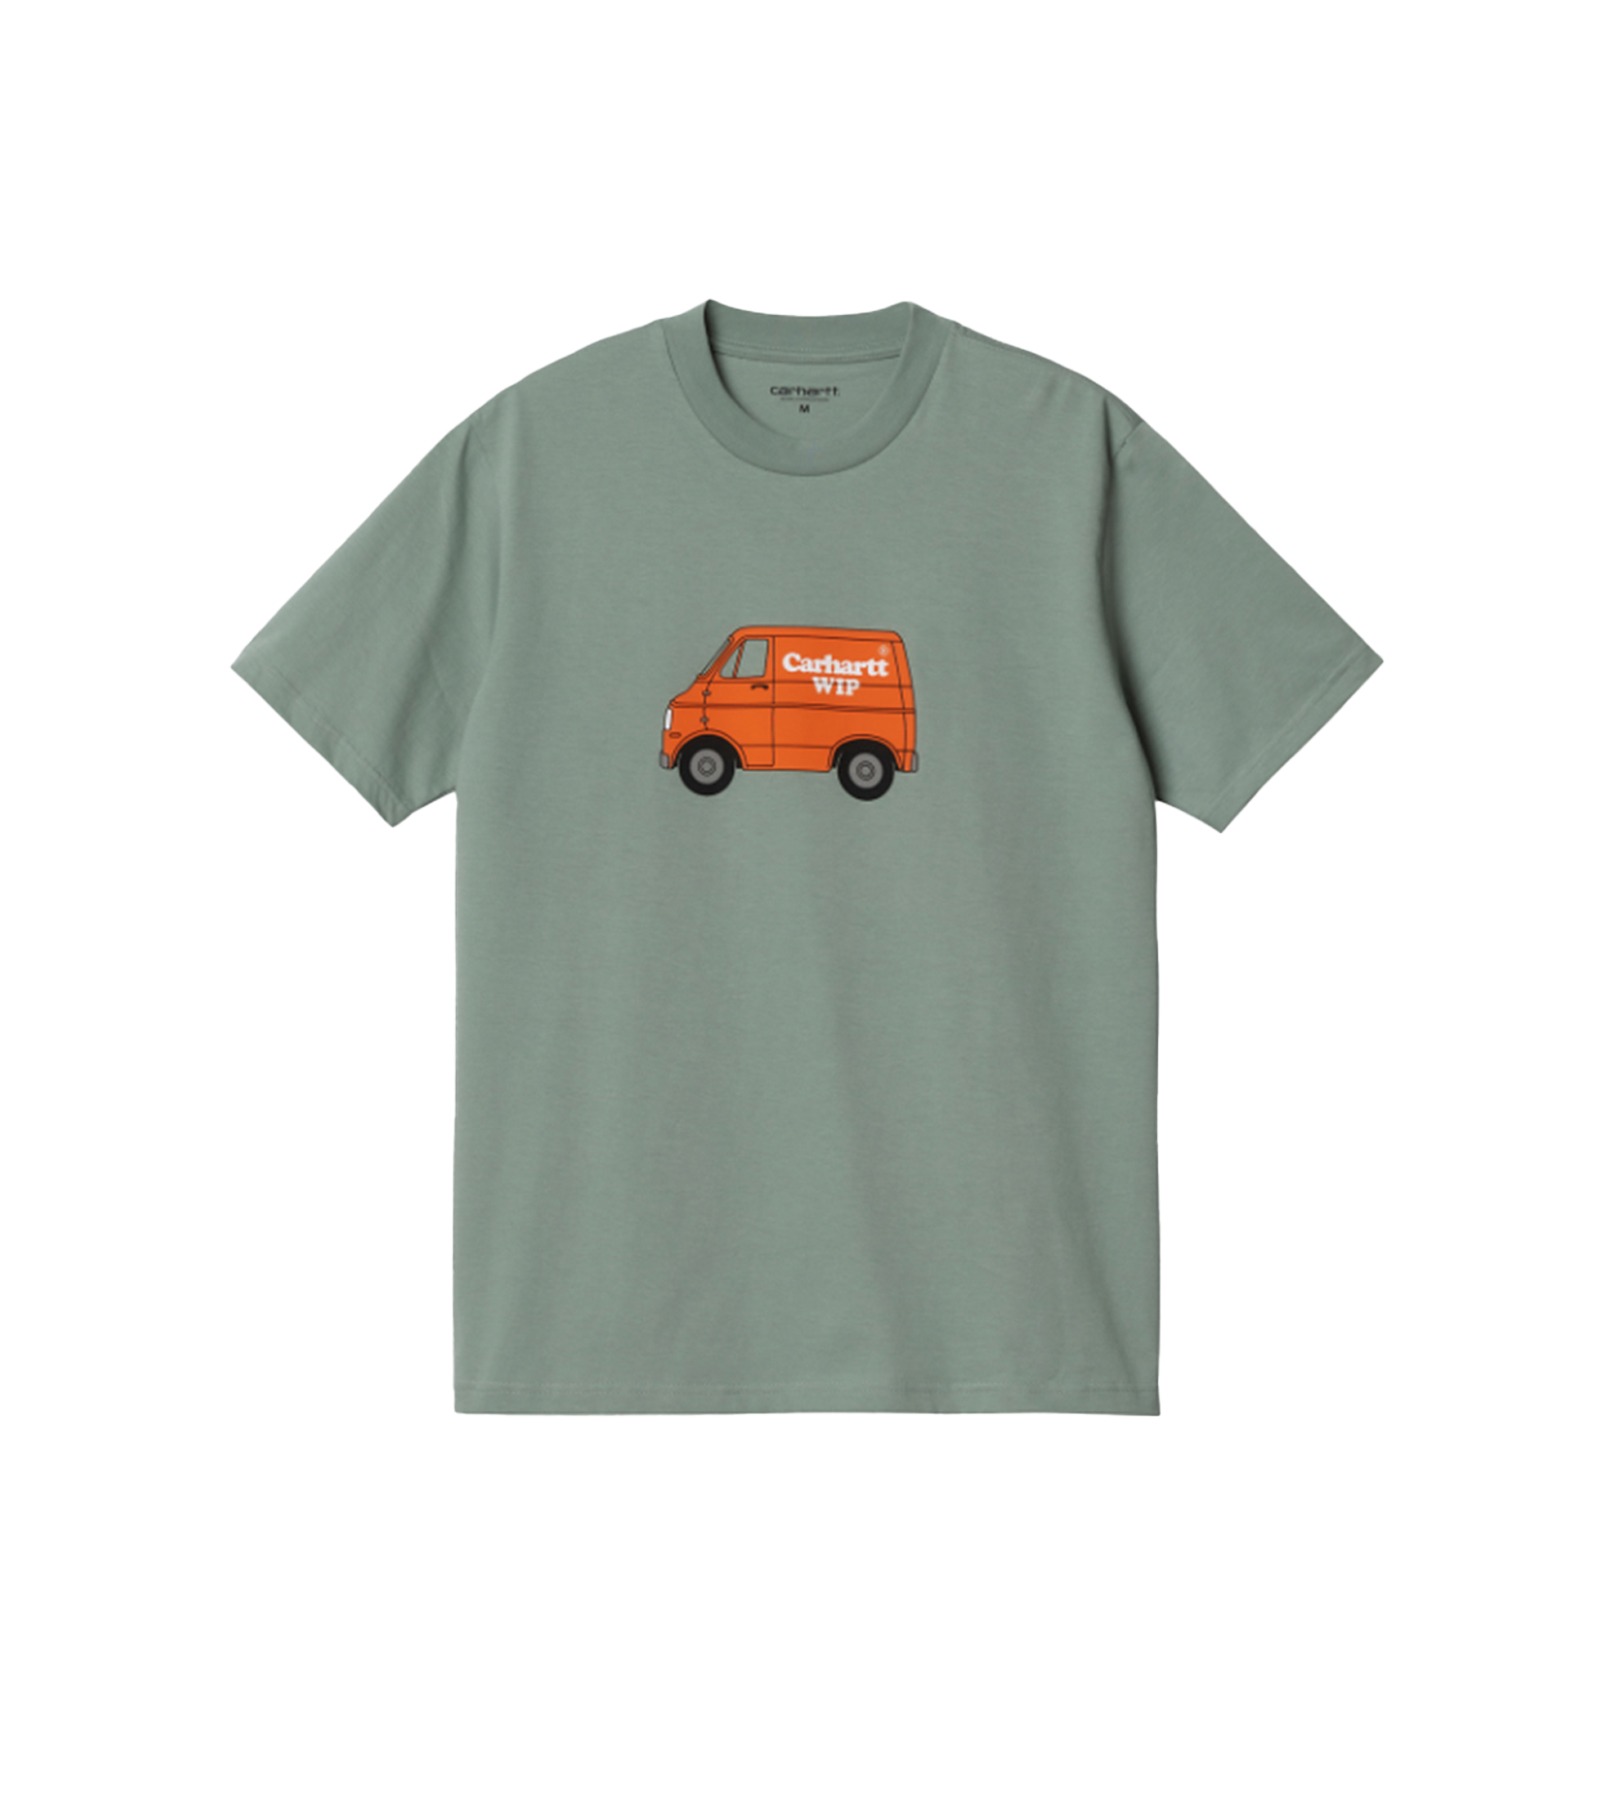 S/S MYSTERY MACHINE T-SHIRT  (GLASSY TEAL)